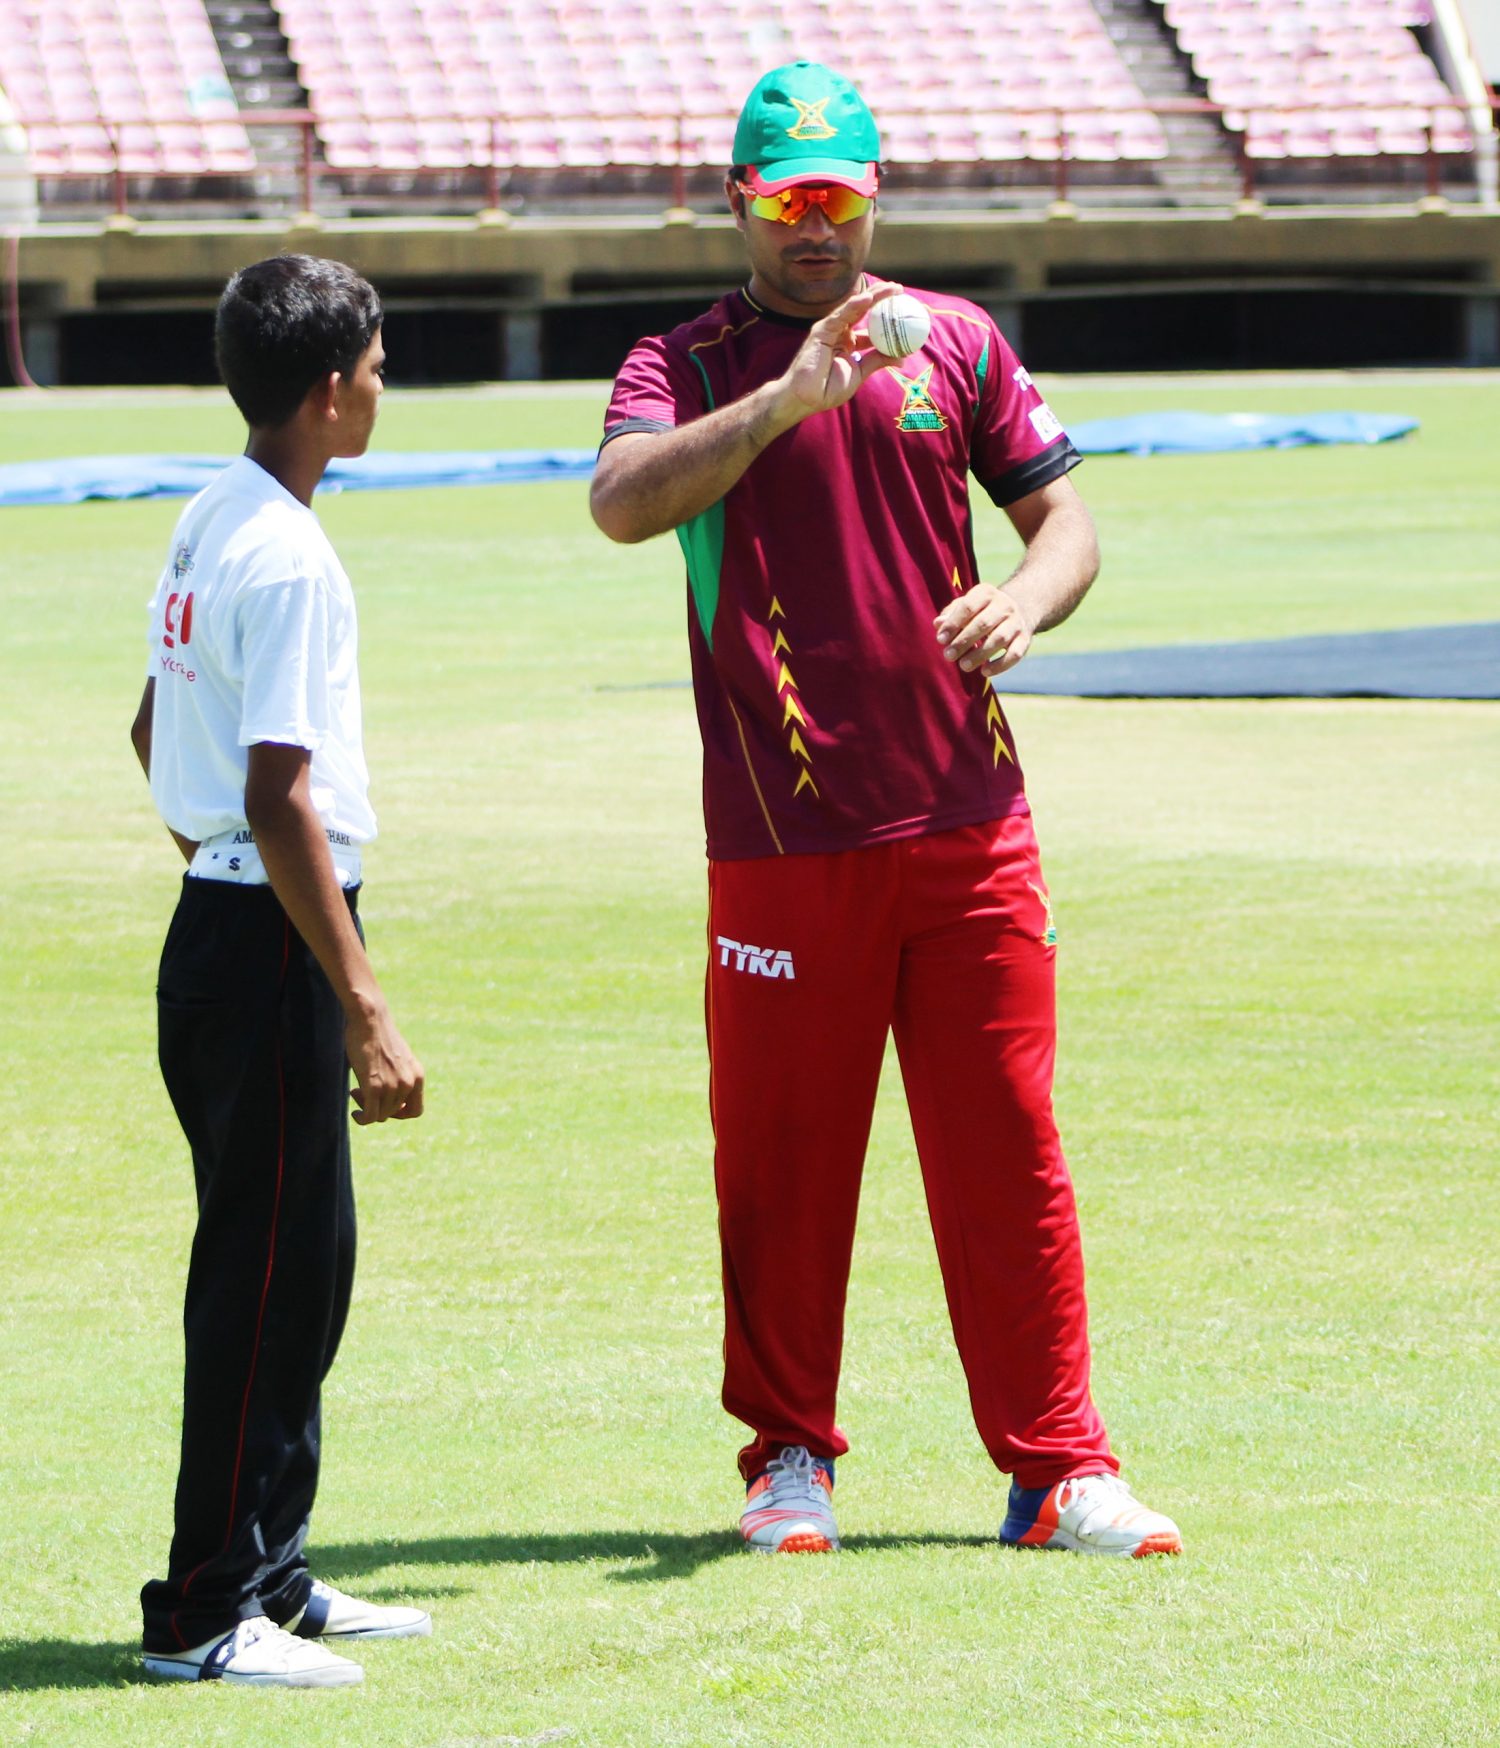 Digicel’s `Big Brother’ programme in full swing as spin sensation Rashid Khan shares some bowling tips with youngster Saturday.(Royston Alkins Photo)